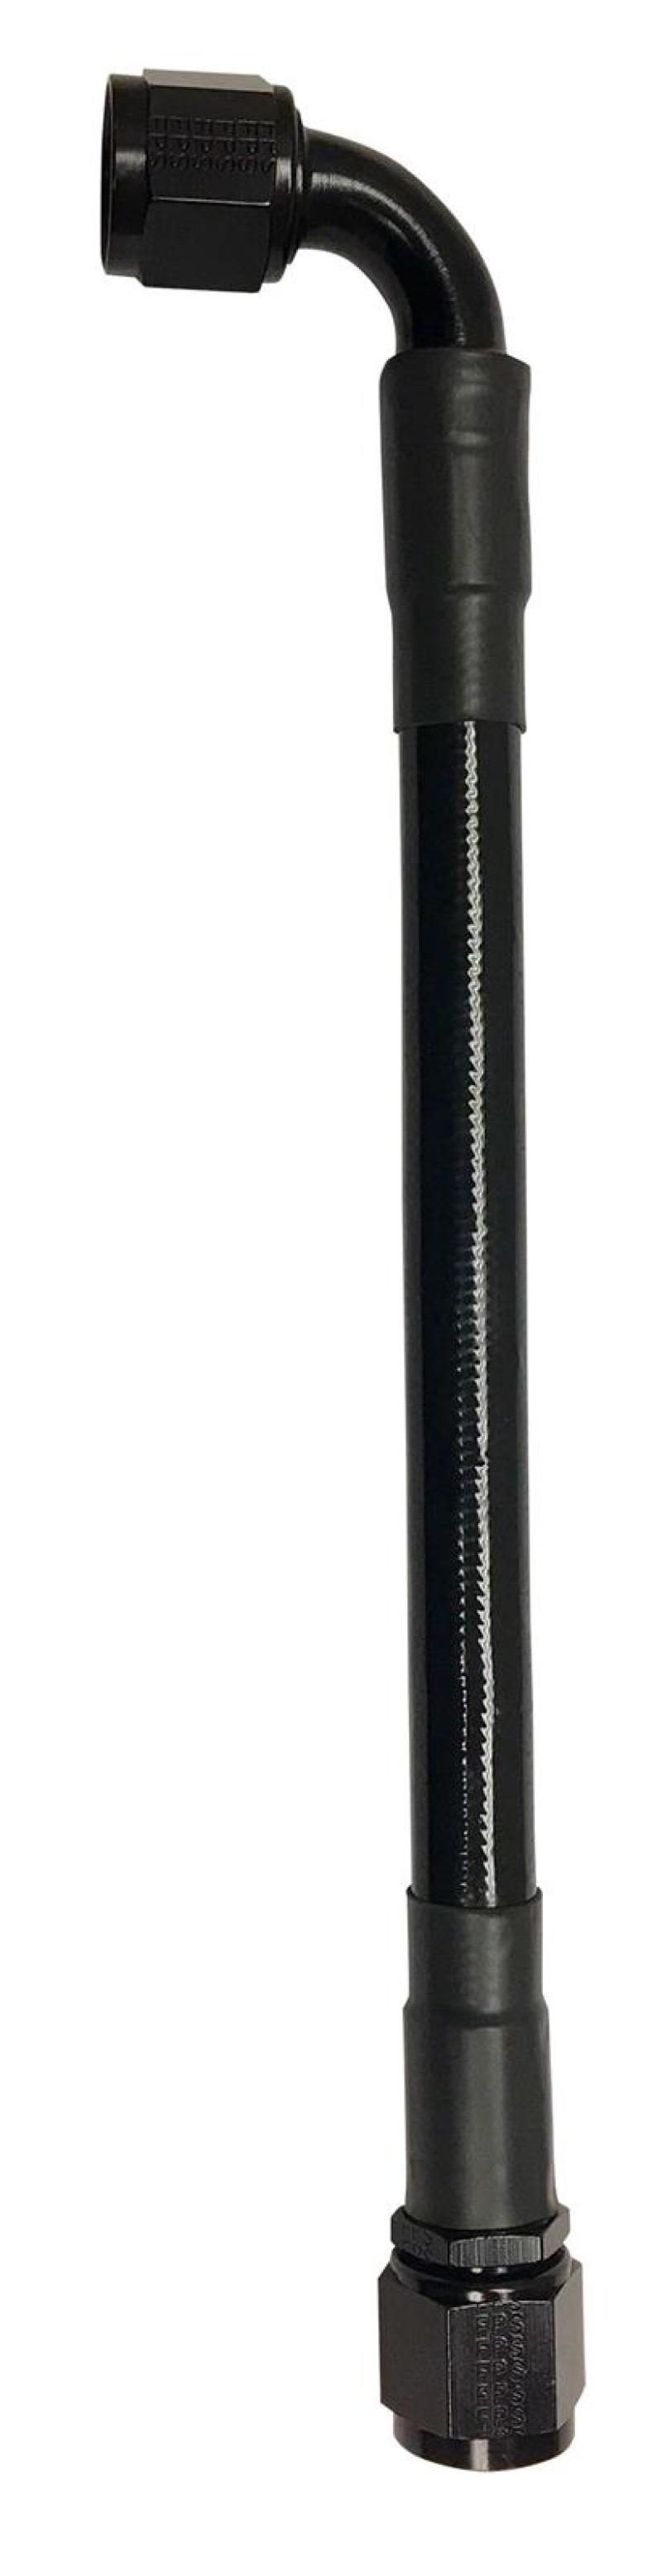 Fragola -6AN Ext Black PTFE Hose Assembly Straight x 90 Degree 16in - 6026-1-2-16BL